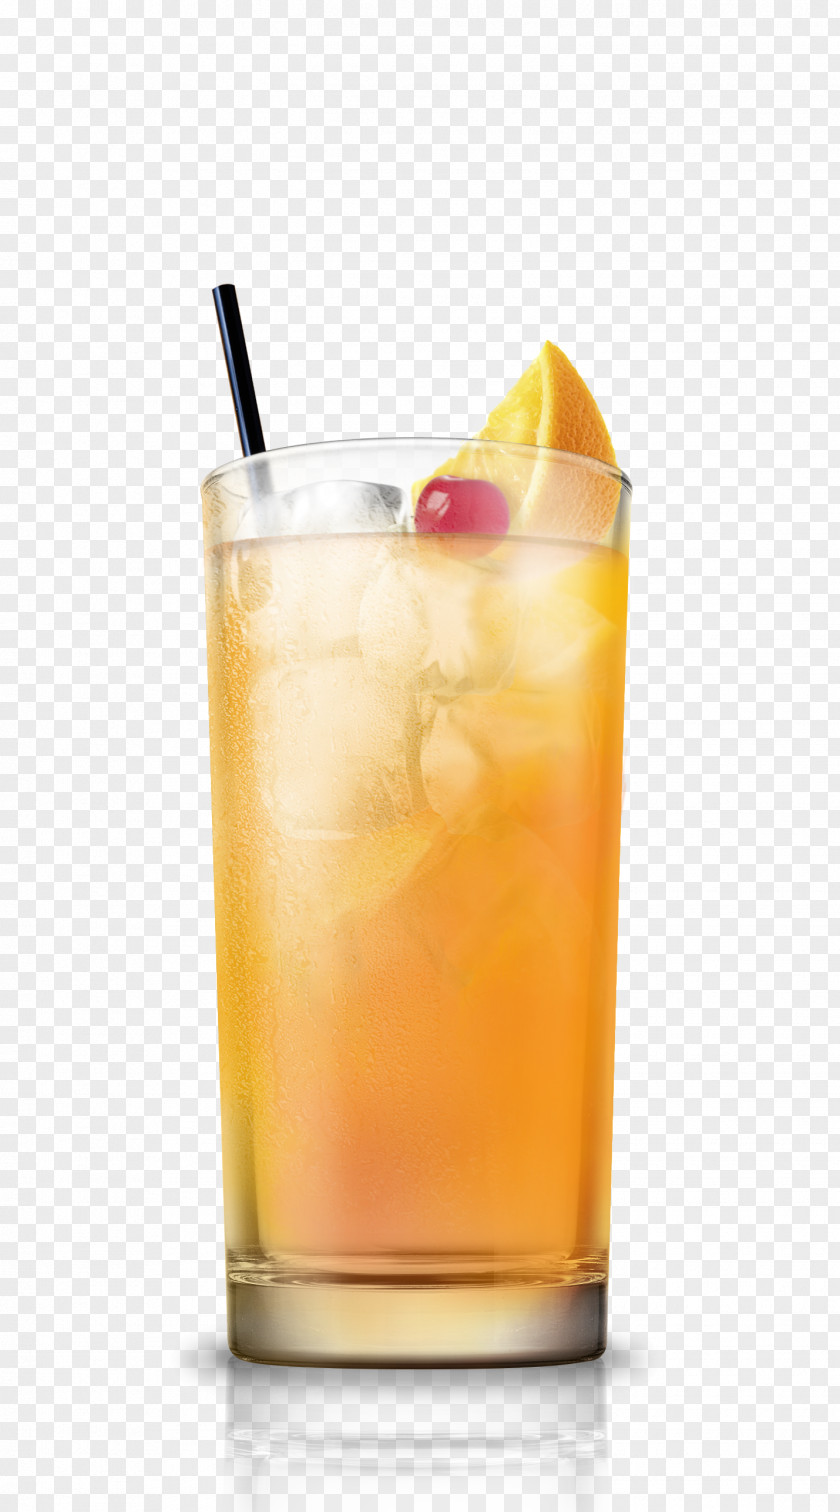 Distilled Beverage Fuzzy Navel Drink Rum Swizzle Alcoholic Non-alcoholic Juice PNG